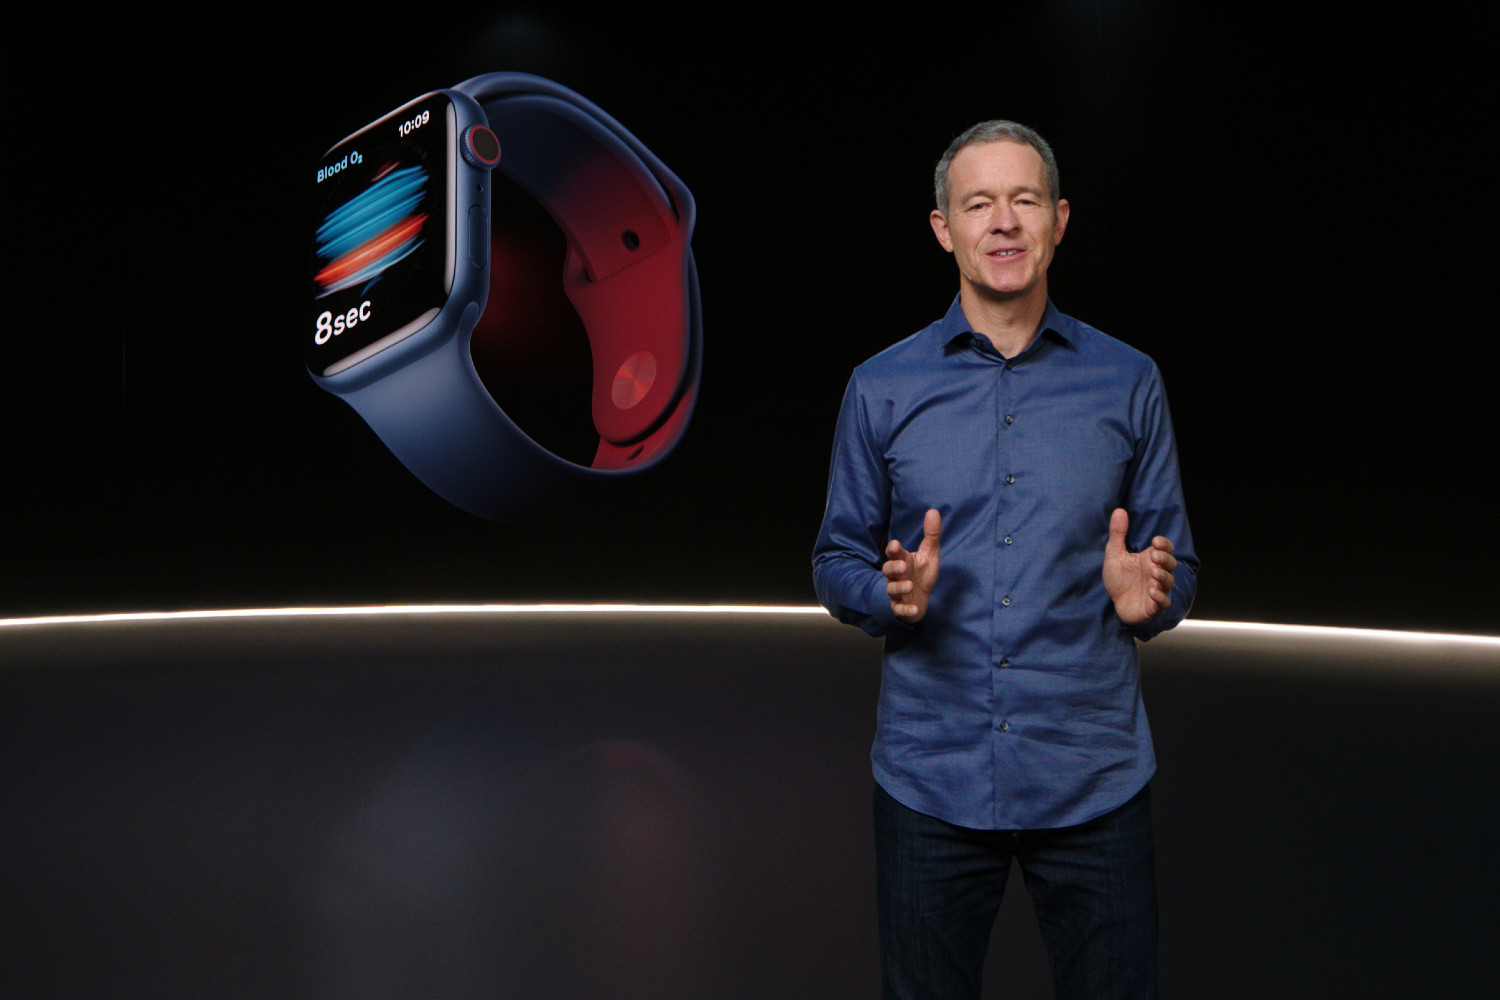 Apple's Jeff Williams introduces a new Apple Watch at an event in September 2020.